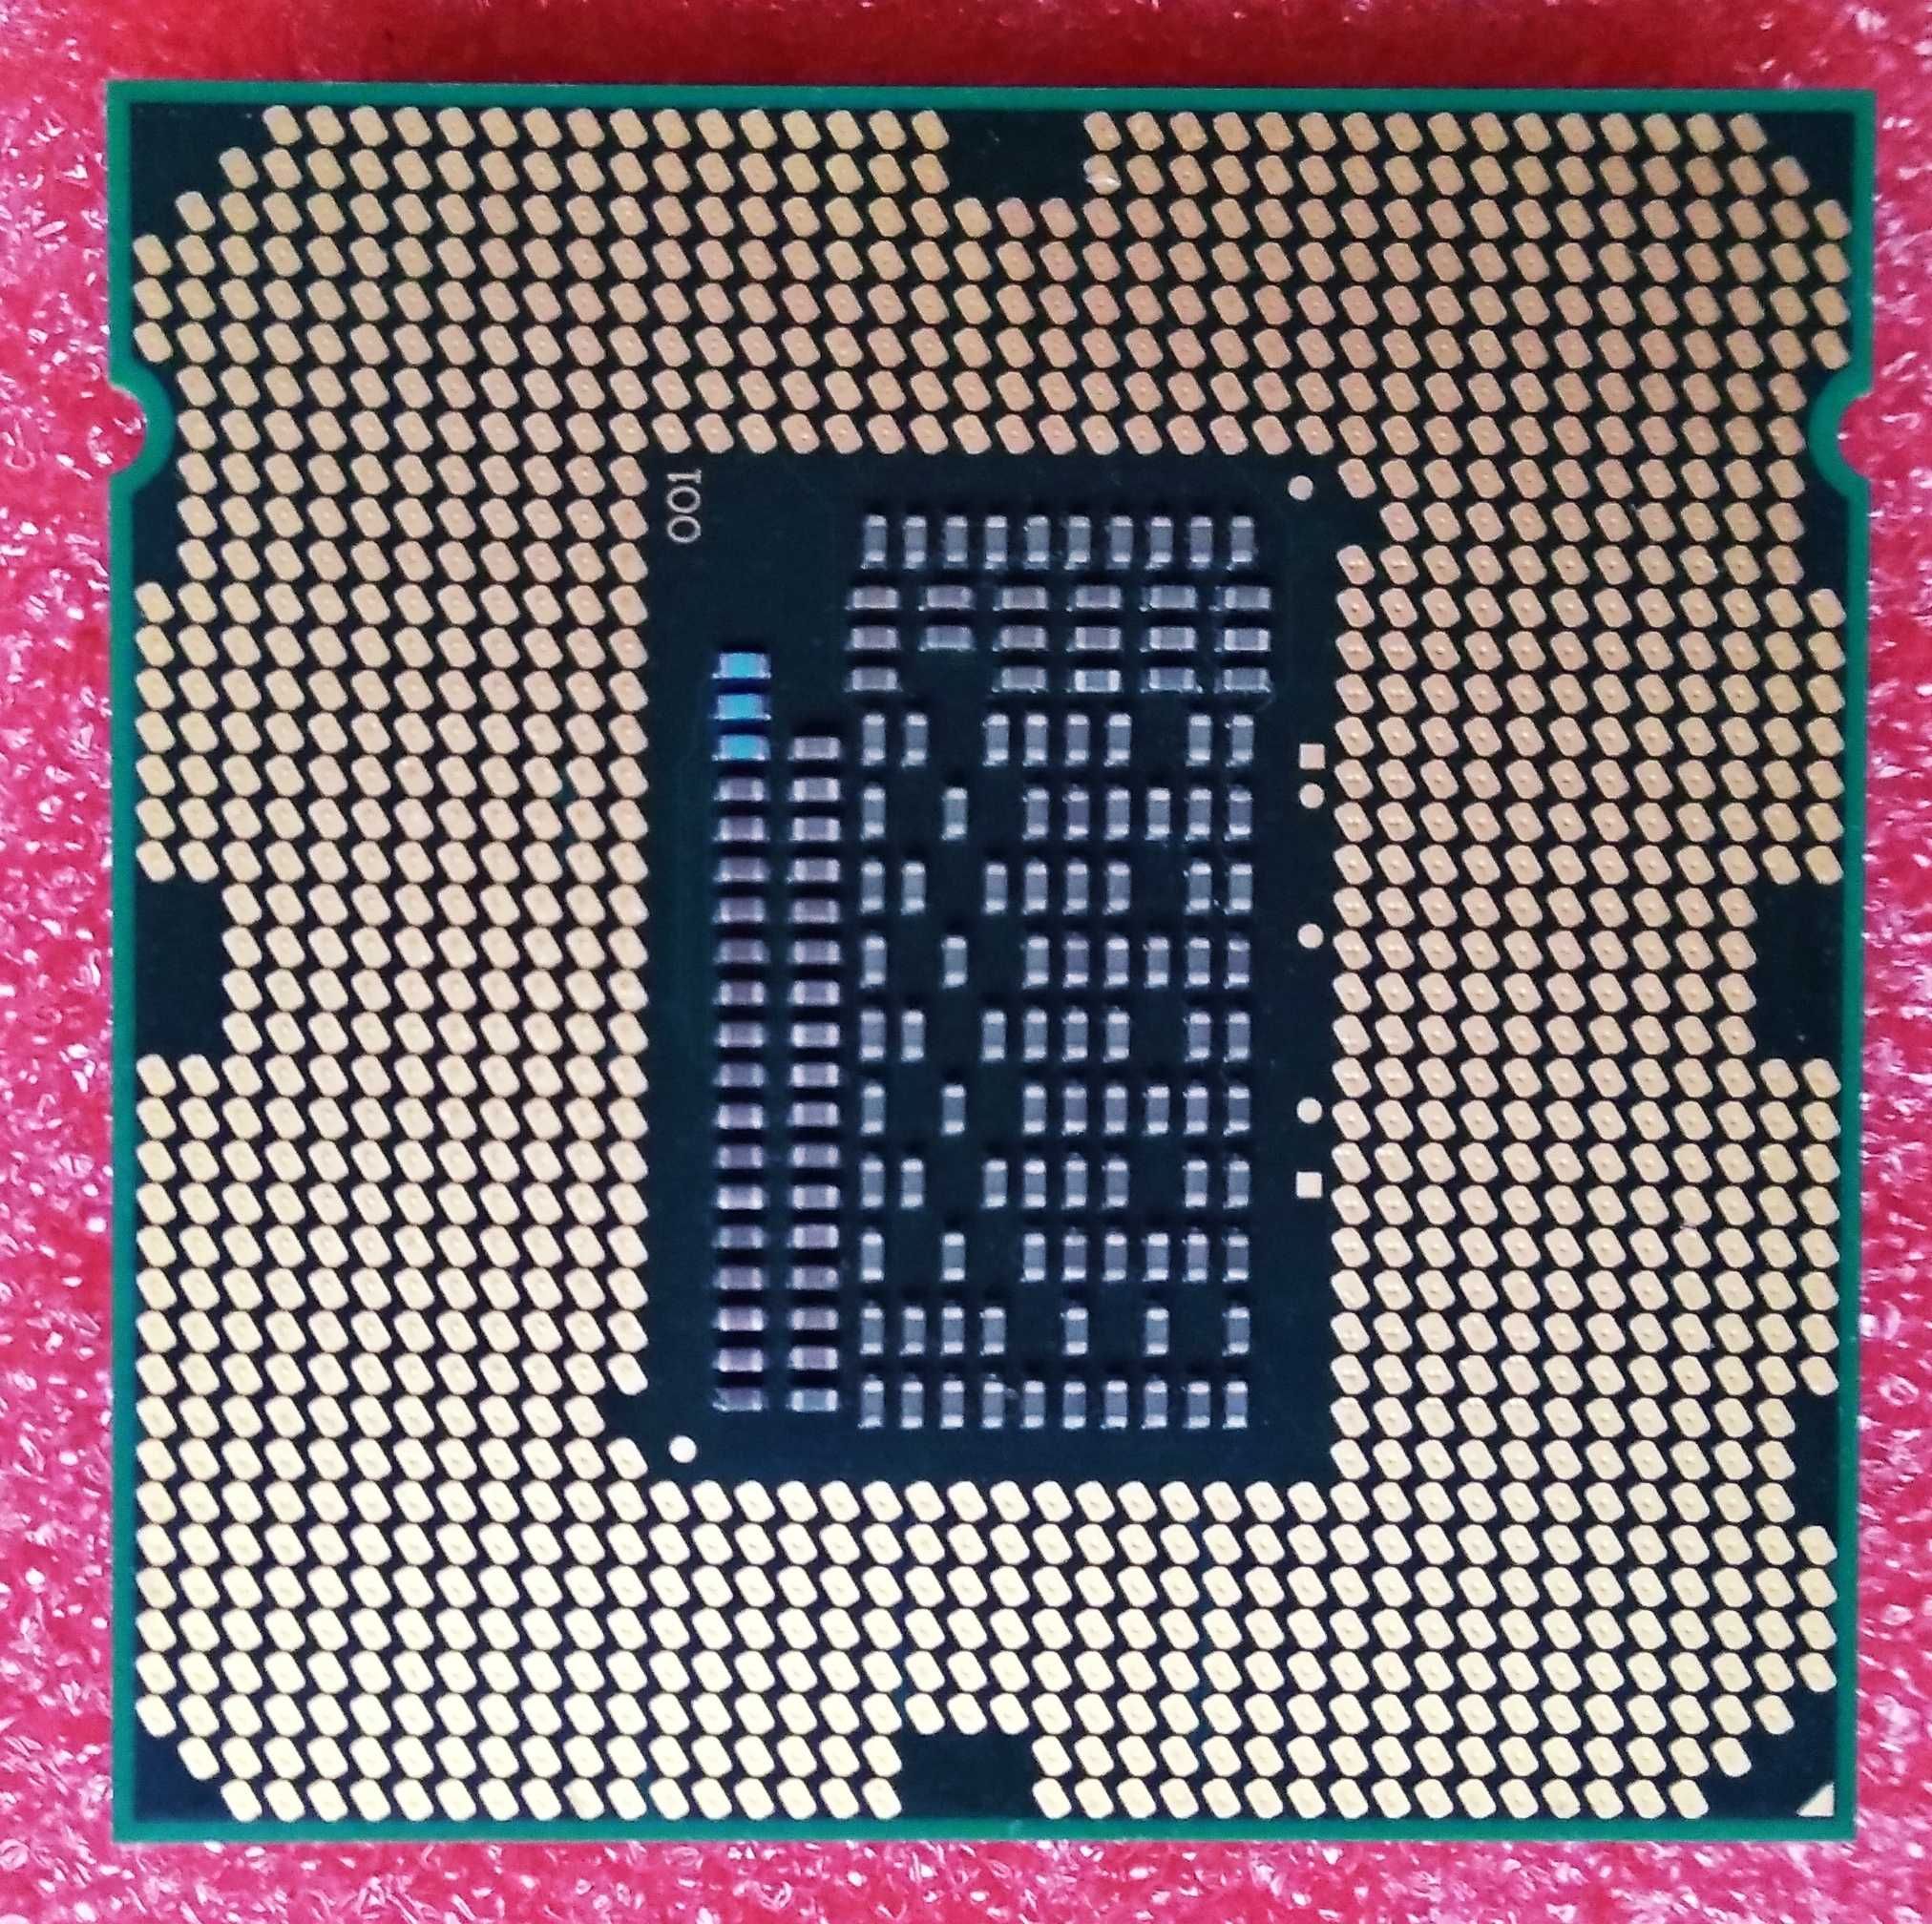 Intel Core i5-2400 3.1 GHz (6M Cache, up to 3.4GHz) Socket 1155 (18ОО)